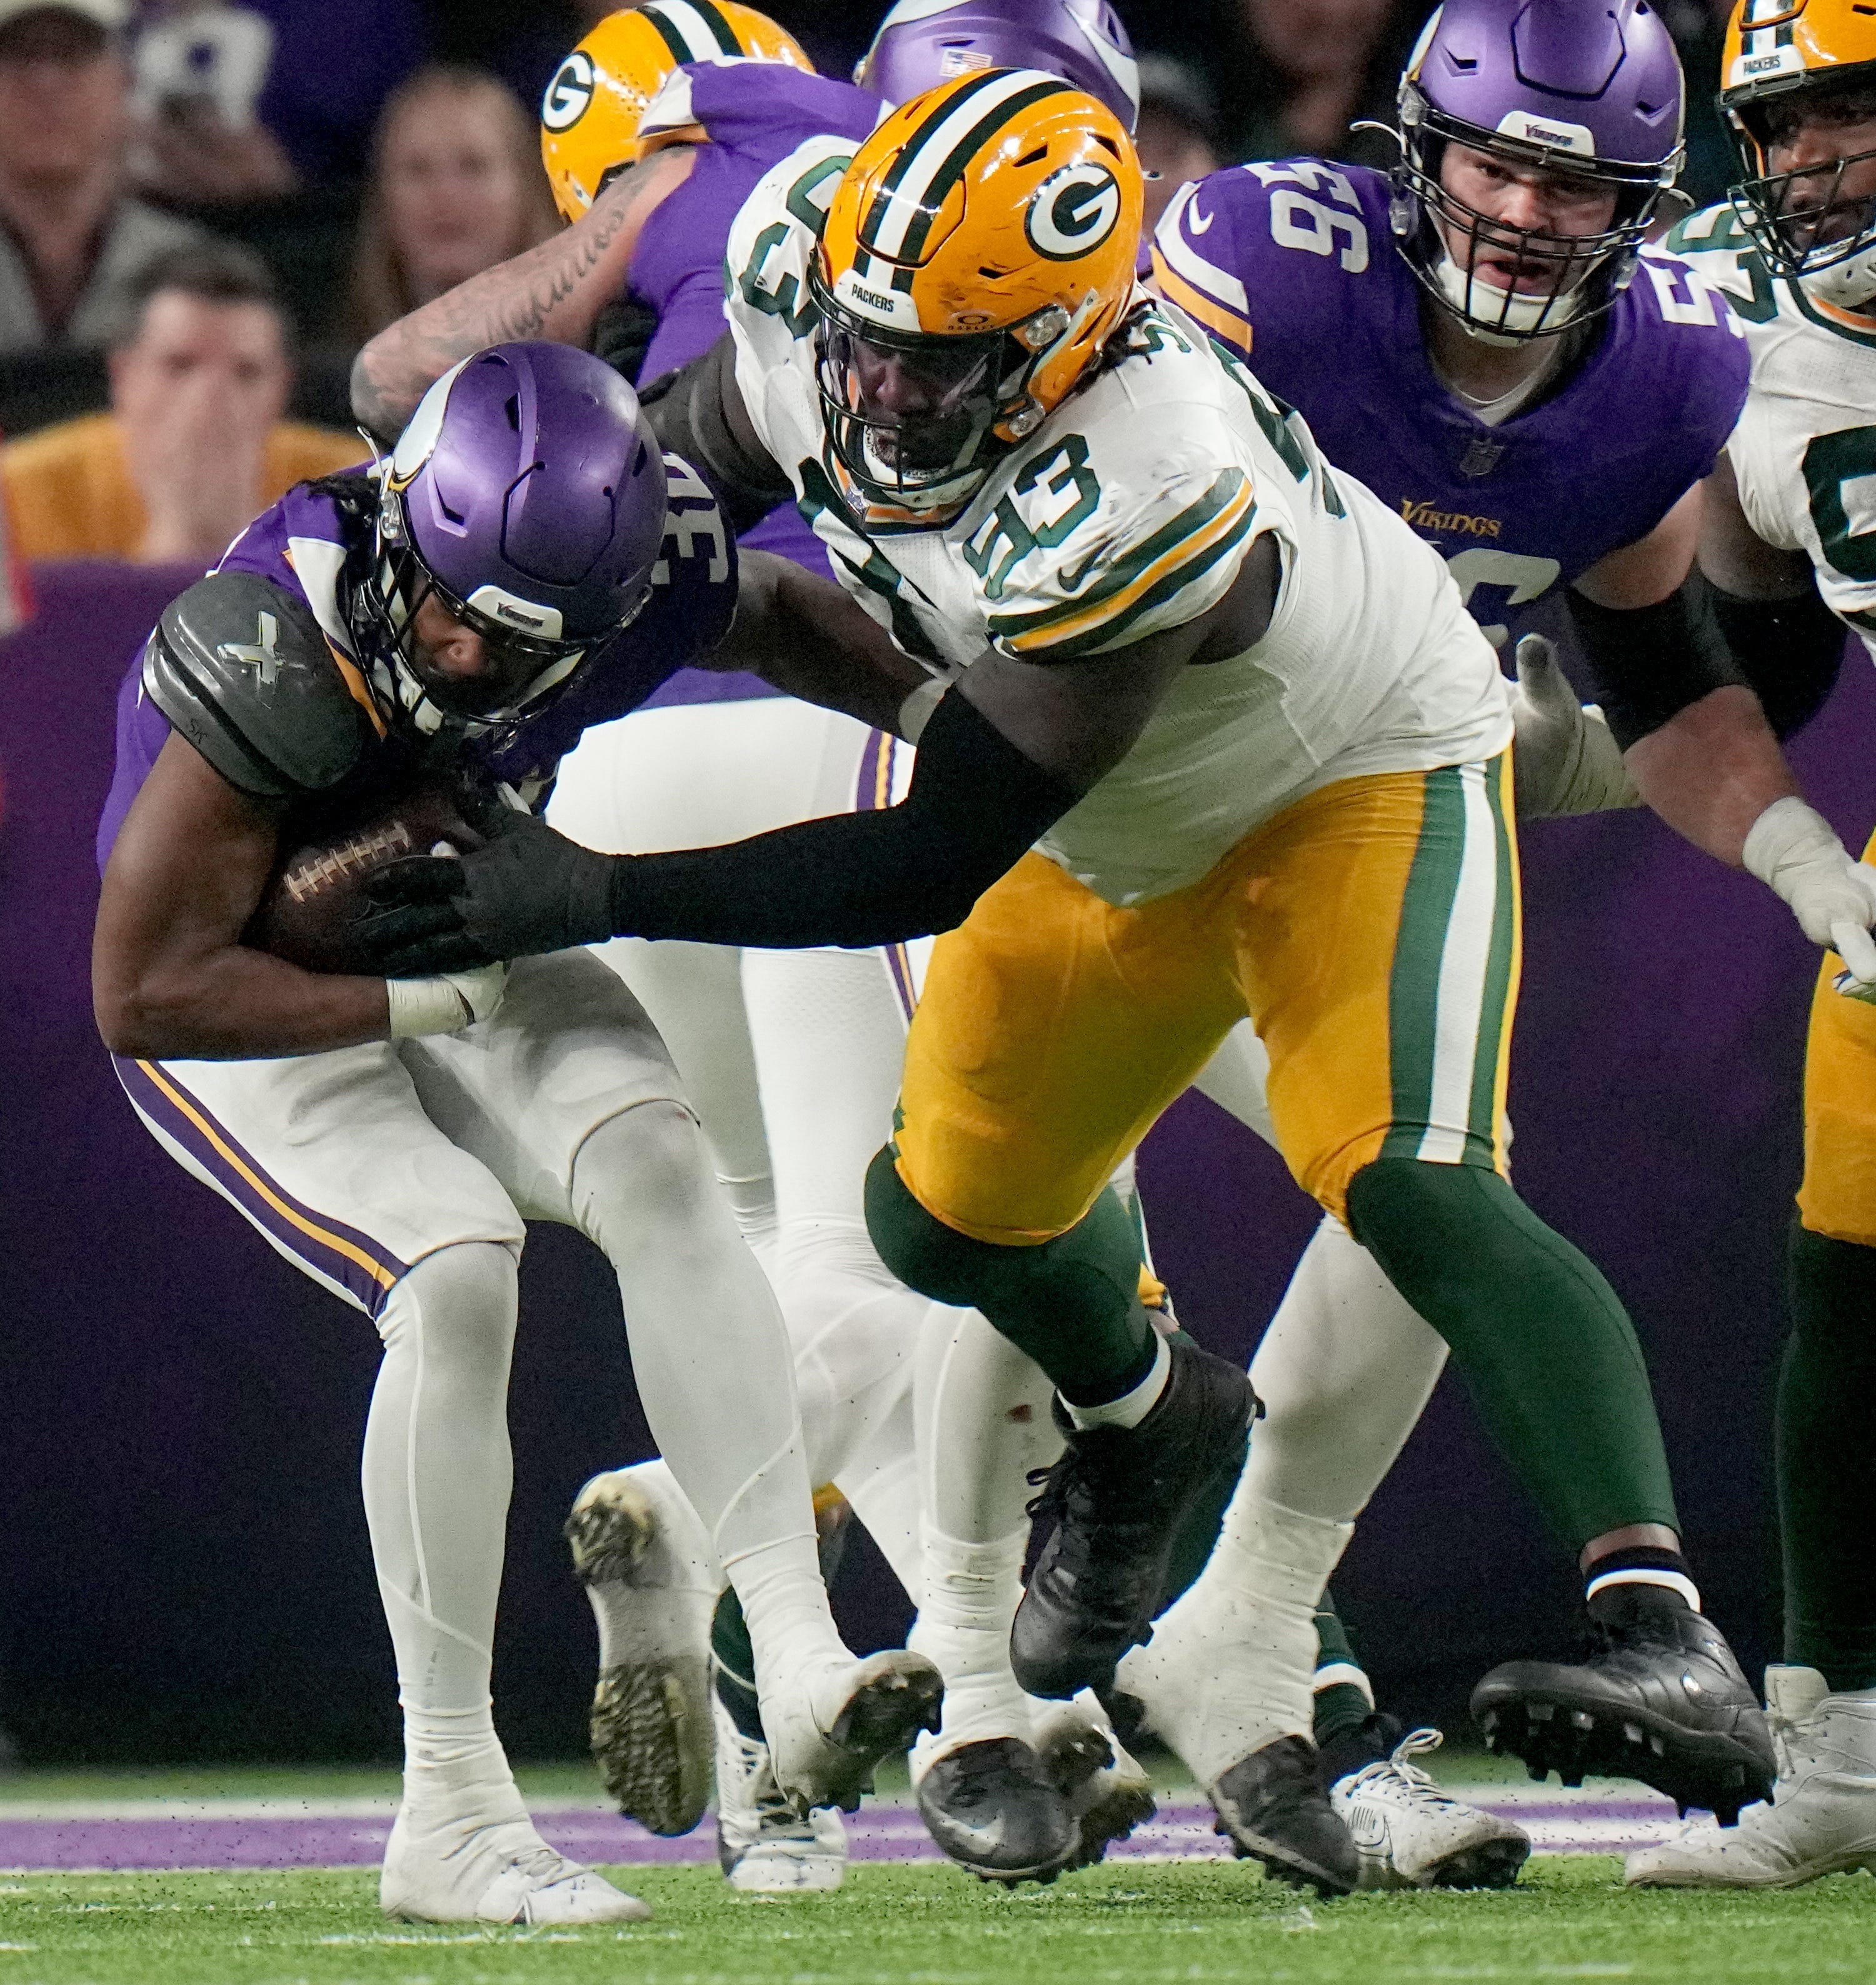 Green Bay Packers defensive lineman T.J. Slaton stuff Minnesota Vikings running back Ty Chanlr at the line during the fourth quarter of their game Sunday, December 31, 2023 at U.S. Bank Stadium in Minneapolis, Minnesota. The Green Bay Packers beat the Minnesota Vikings 33-10.